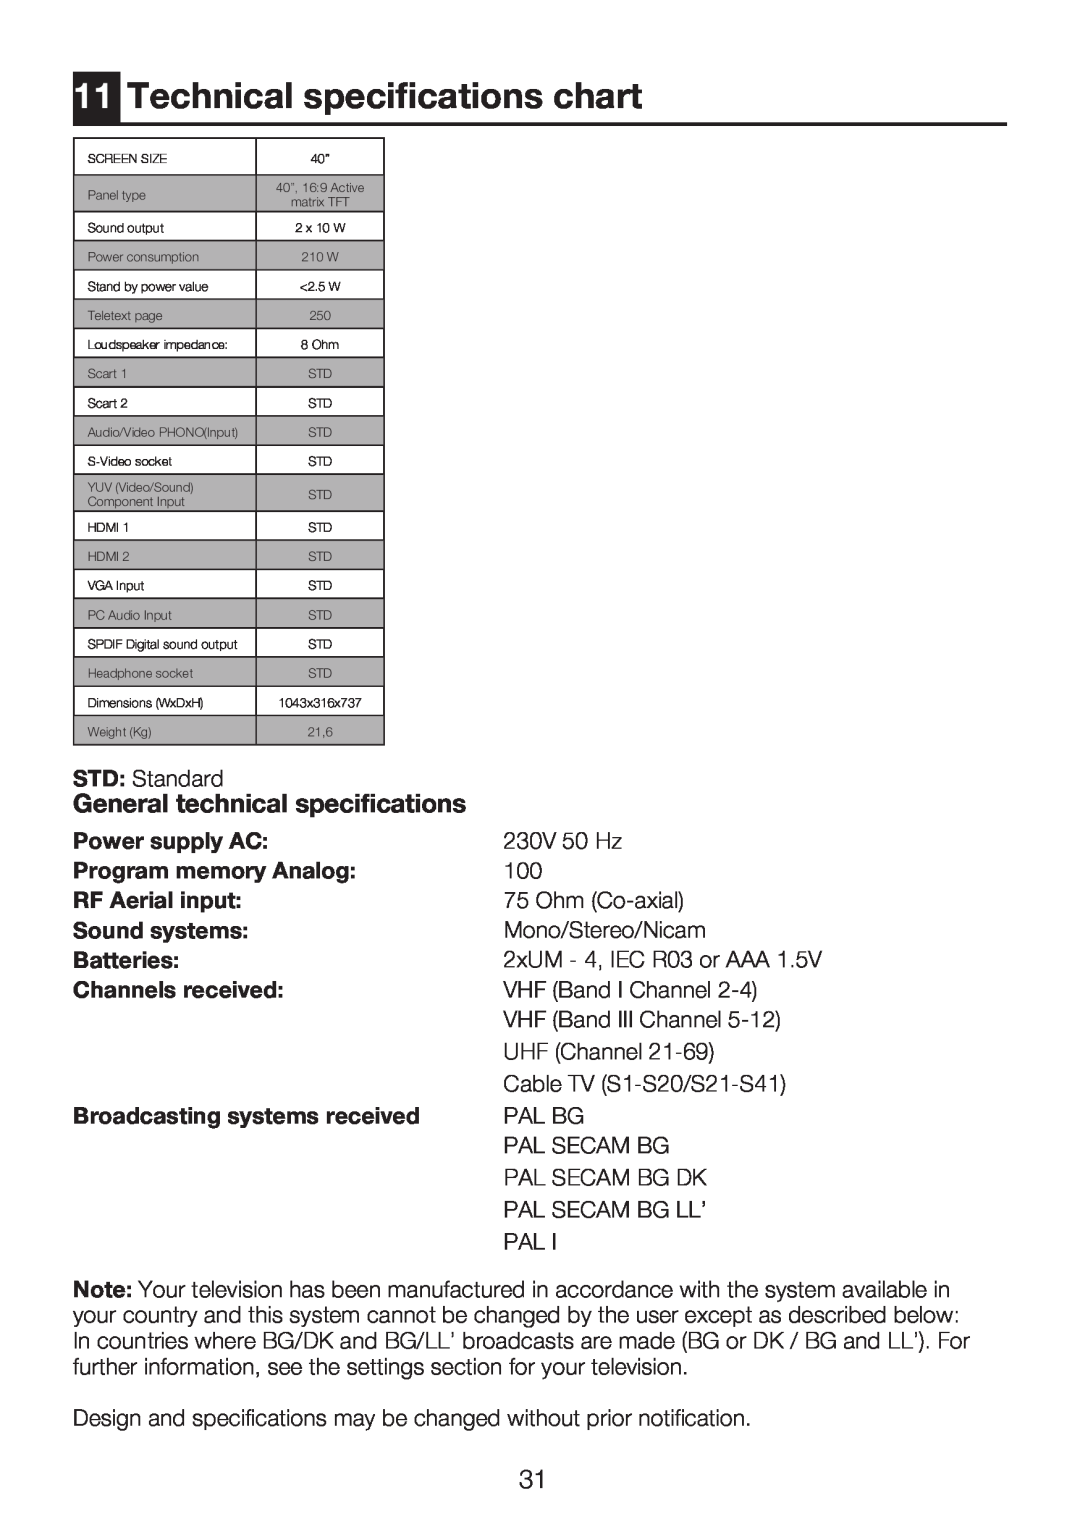 Beko 40WLU550FHID Technical specifications chart, General technical specifications, Power supply AC, Program memory Analog 